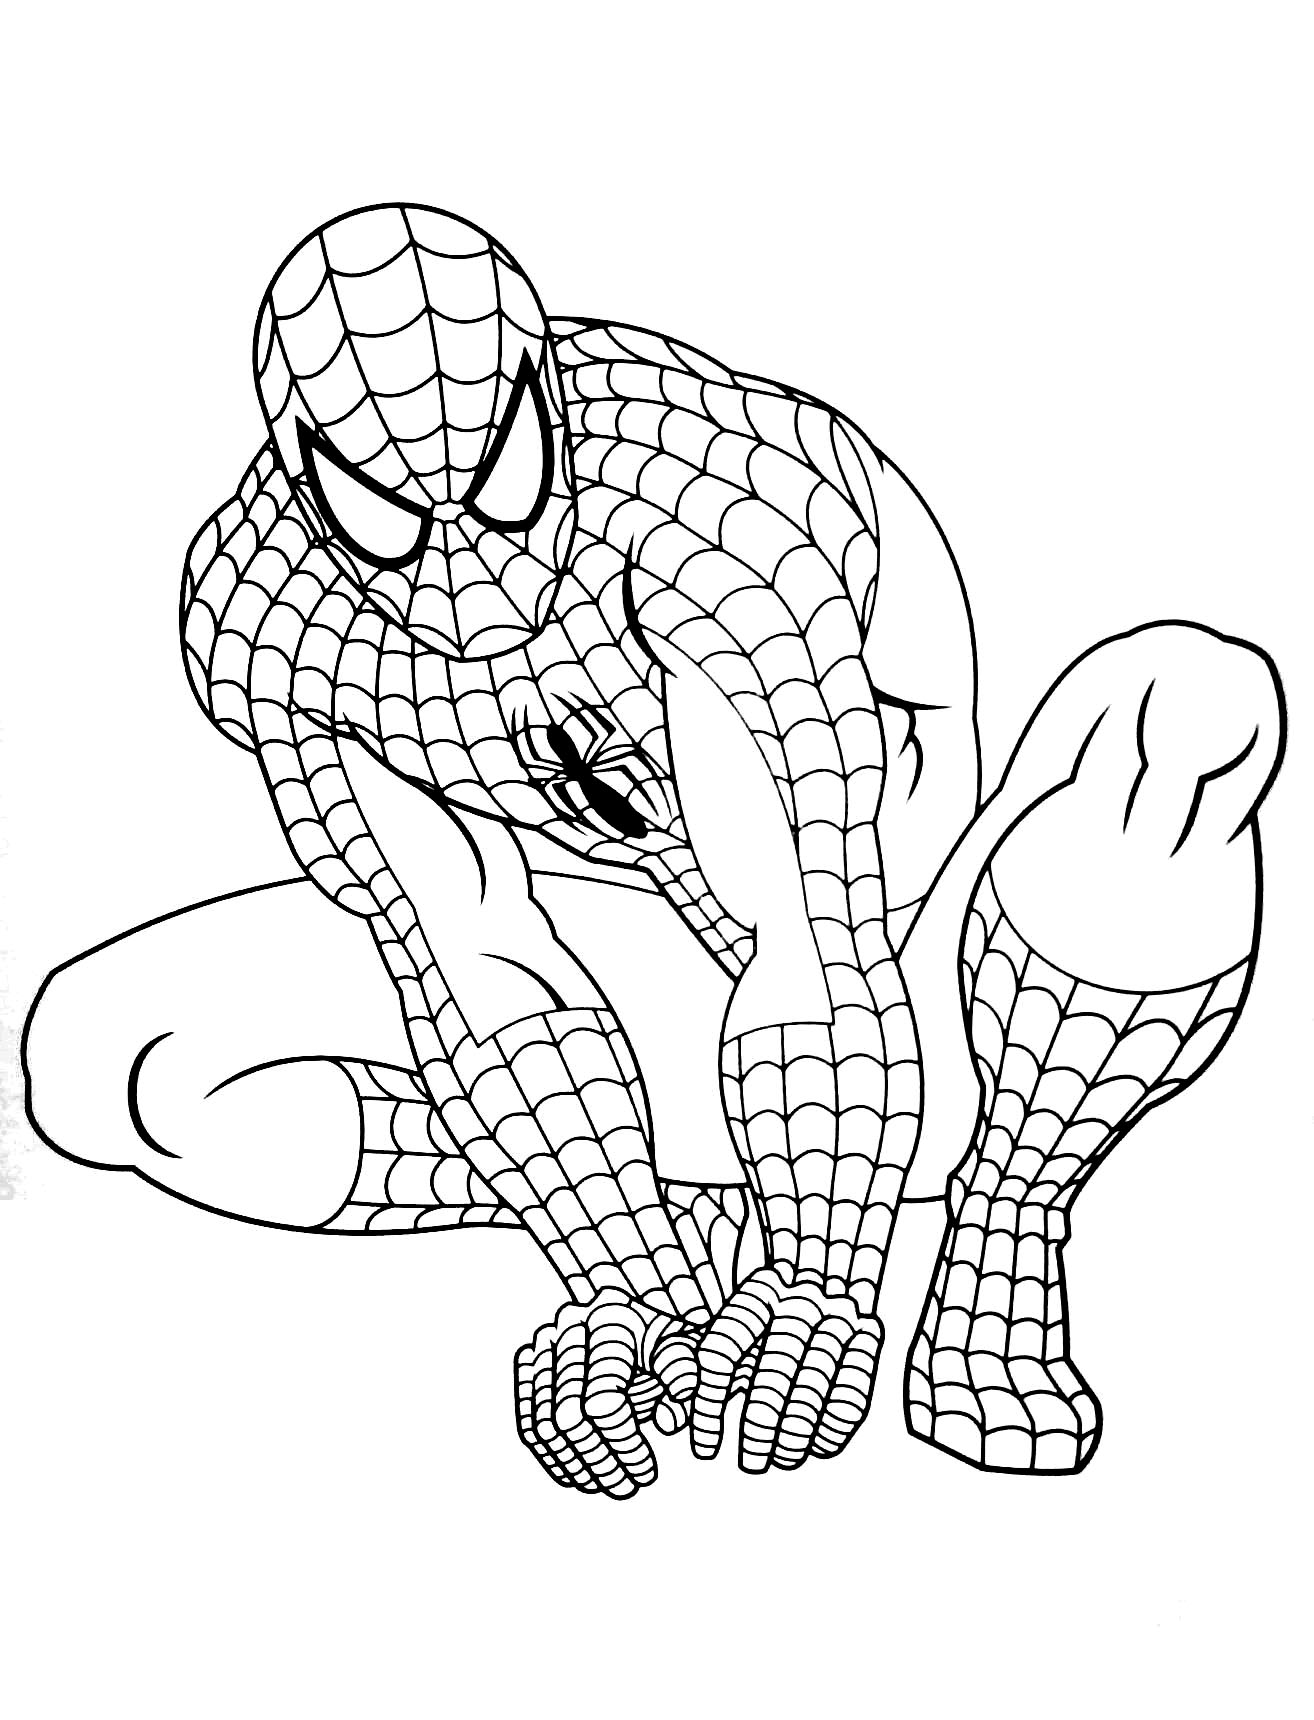 Download Simple Spiderman Coloring Pages For Kids